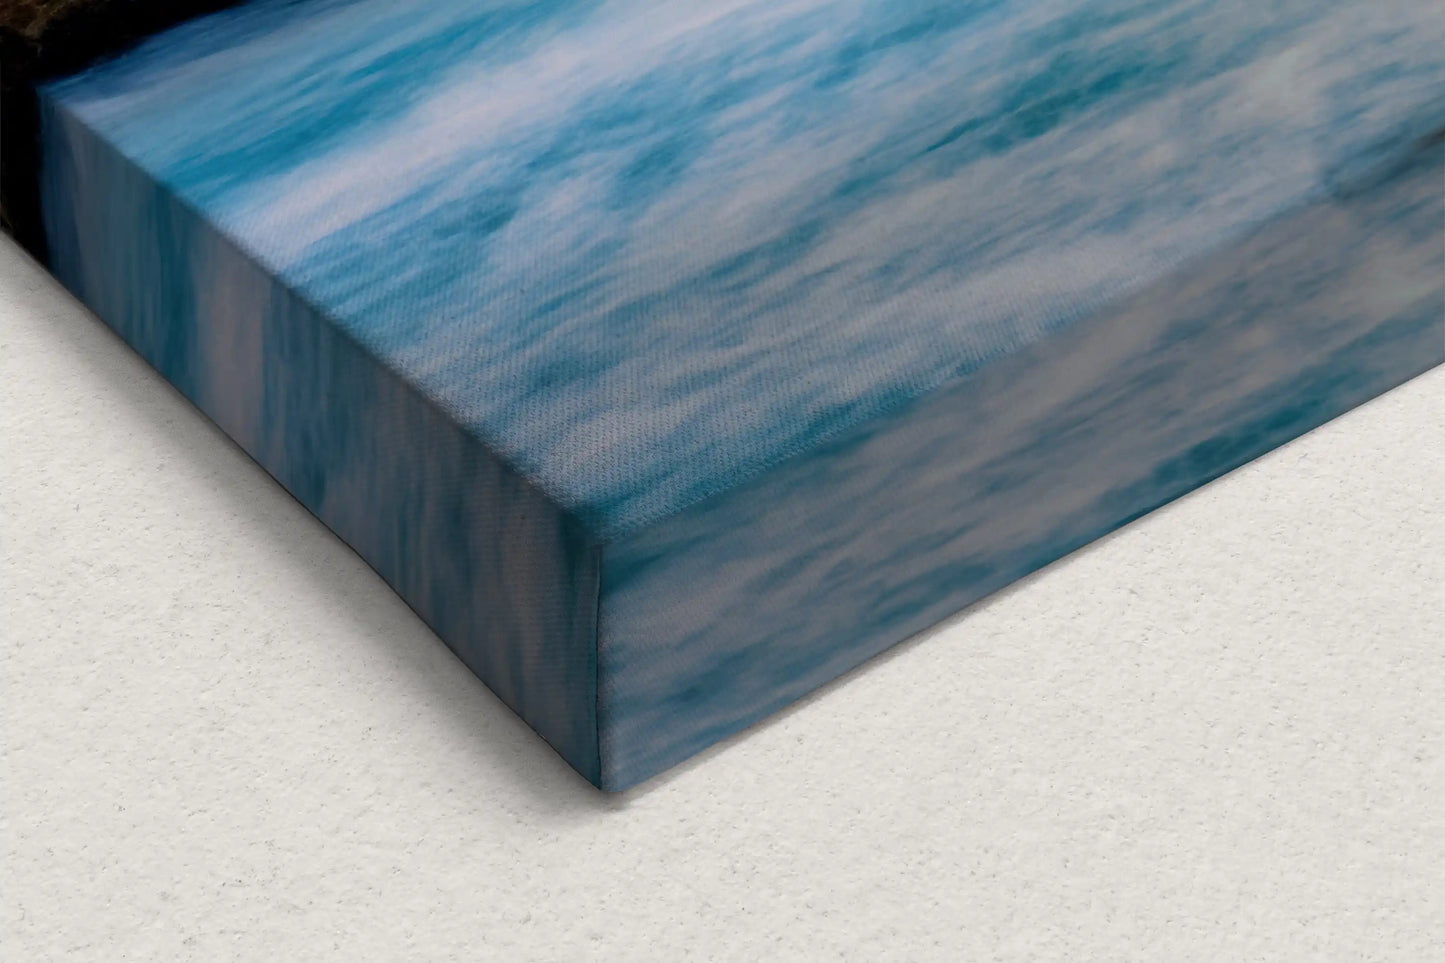 Close-up of a canvas corner showing the smooth transition of blue hues capturing the fluidity of the California Pacific Seascape.